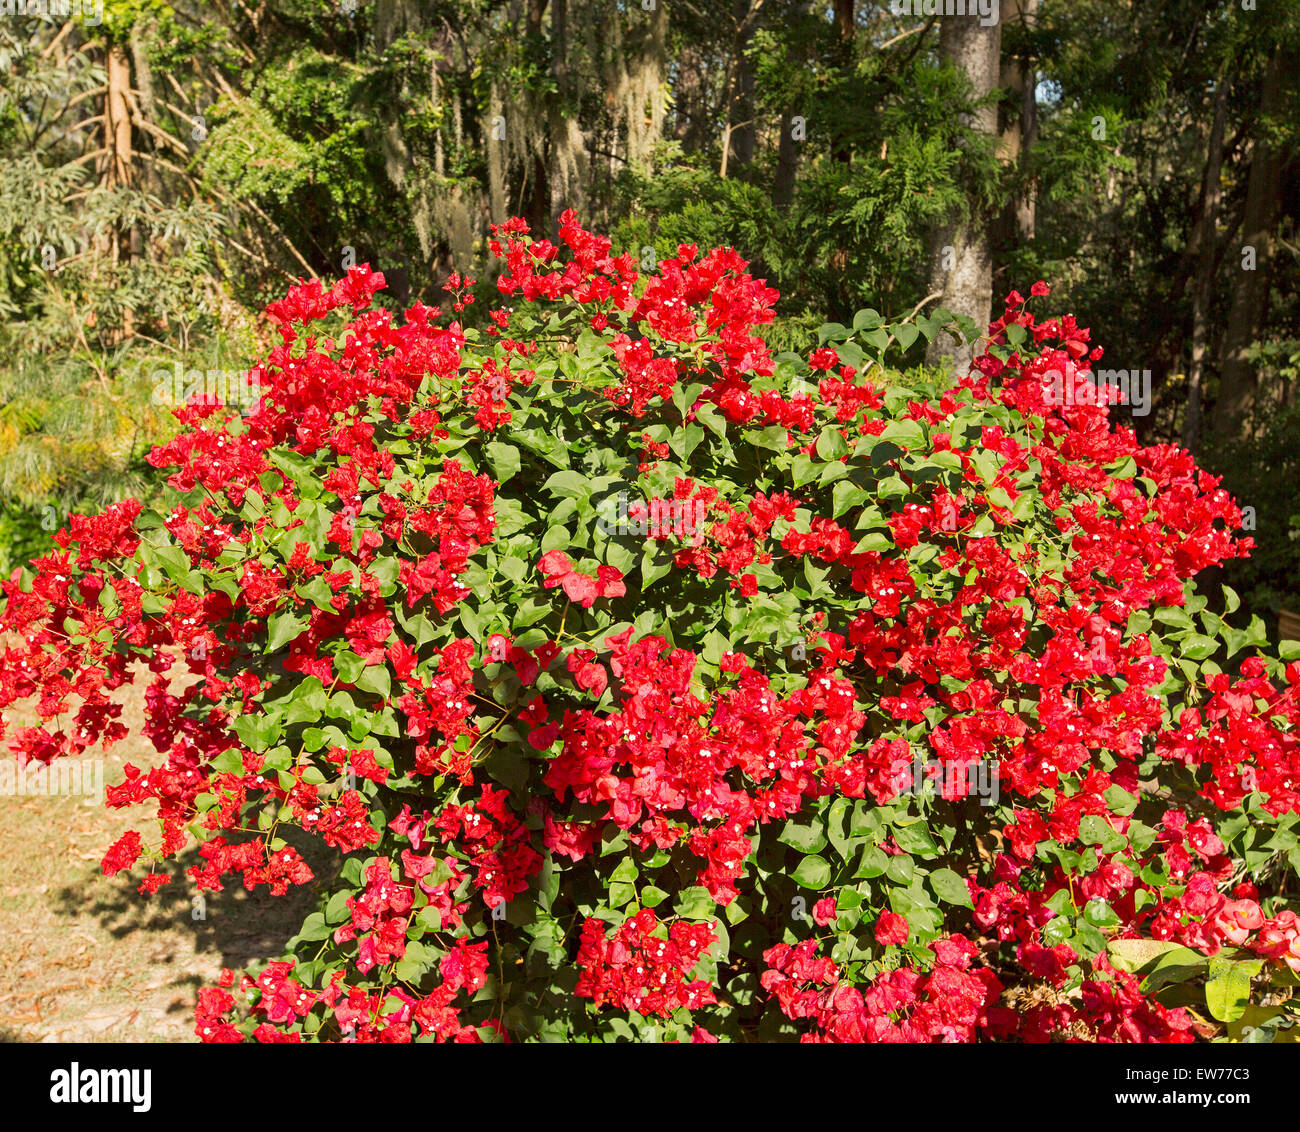 Dwarf Bambino bougainvillea 'Jazzi'  with mass of bright red flowers & emerald green leaves with background of dark garden vegetation Stock Photo